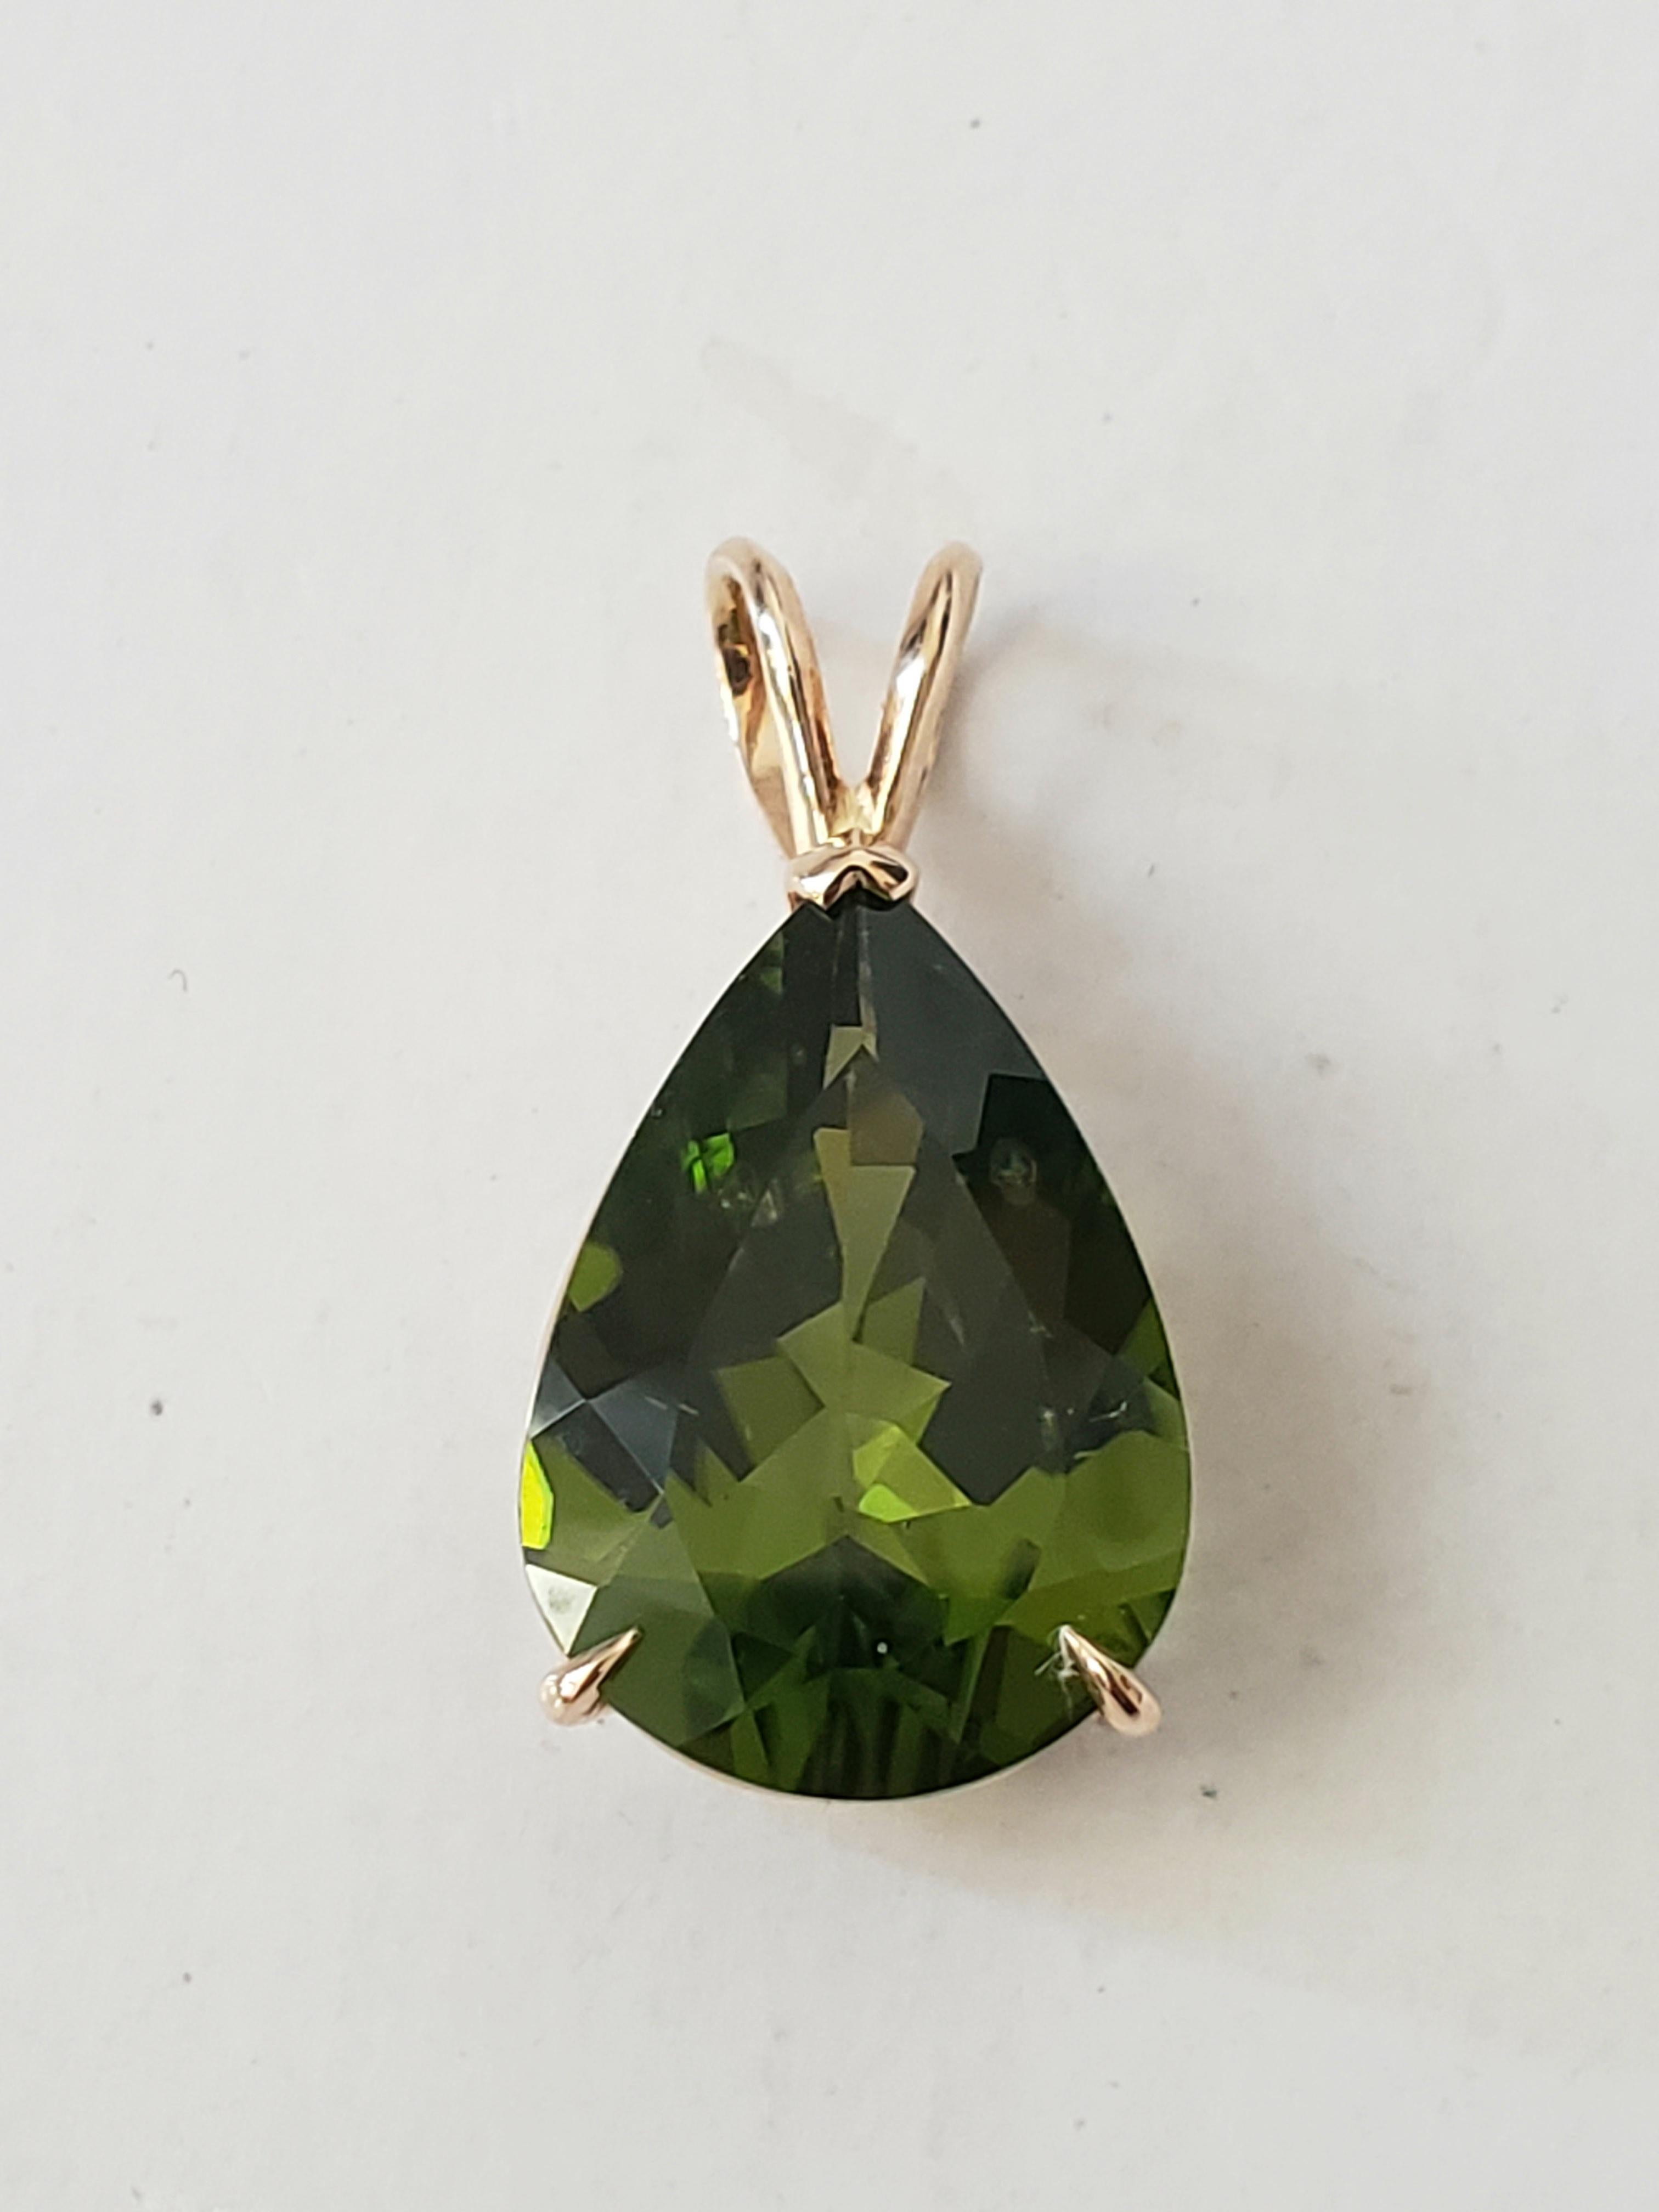 Add a touch of elegance to your outfit with this stunning pear-shaped pendant from LaFrancee. The pendant features a natural, untreated 12.22 ct Burma peridot in a teardrop shape, set in 14k yellow gold. The deep emerald green color of the peridot